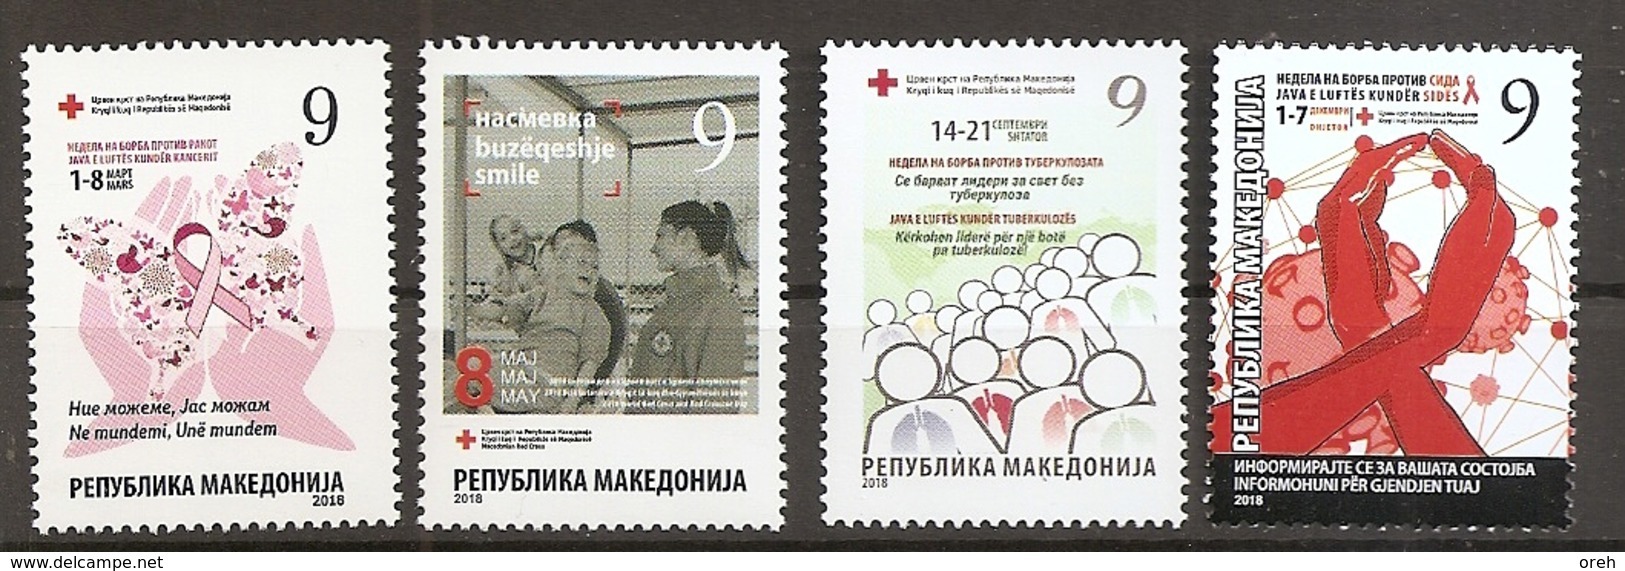 MACEDONIA 2018,COMPLETE,RED CROSS,SOLIDARITY,tuberculose,,ADITIONAL STAMPS,,,MNH - Croix-Rouge